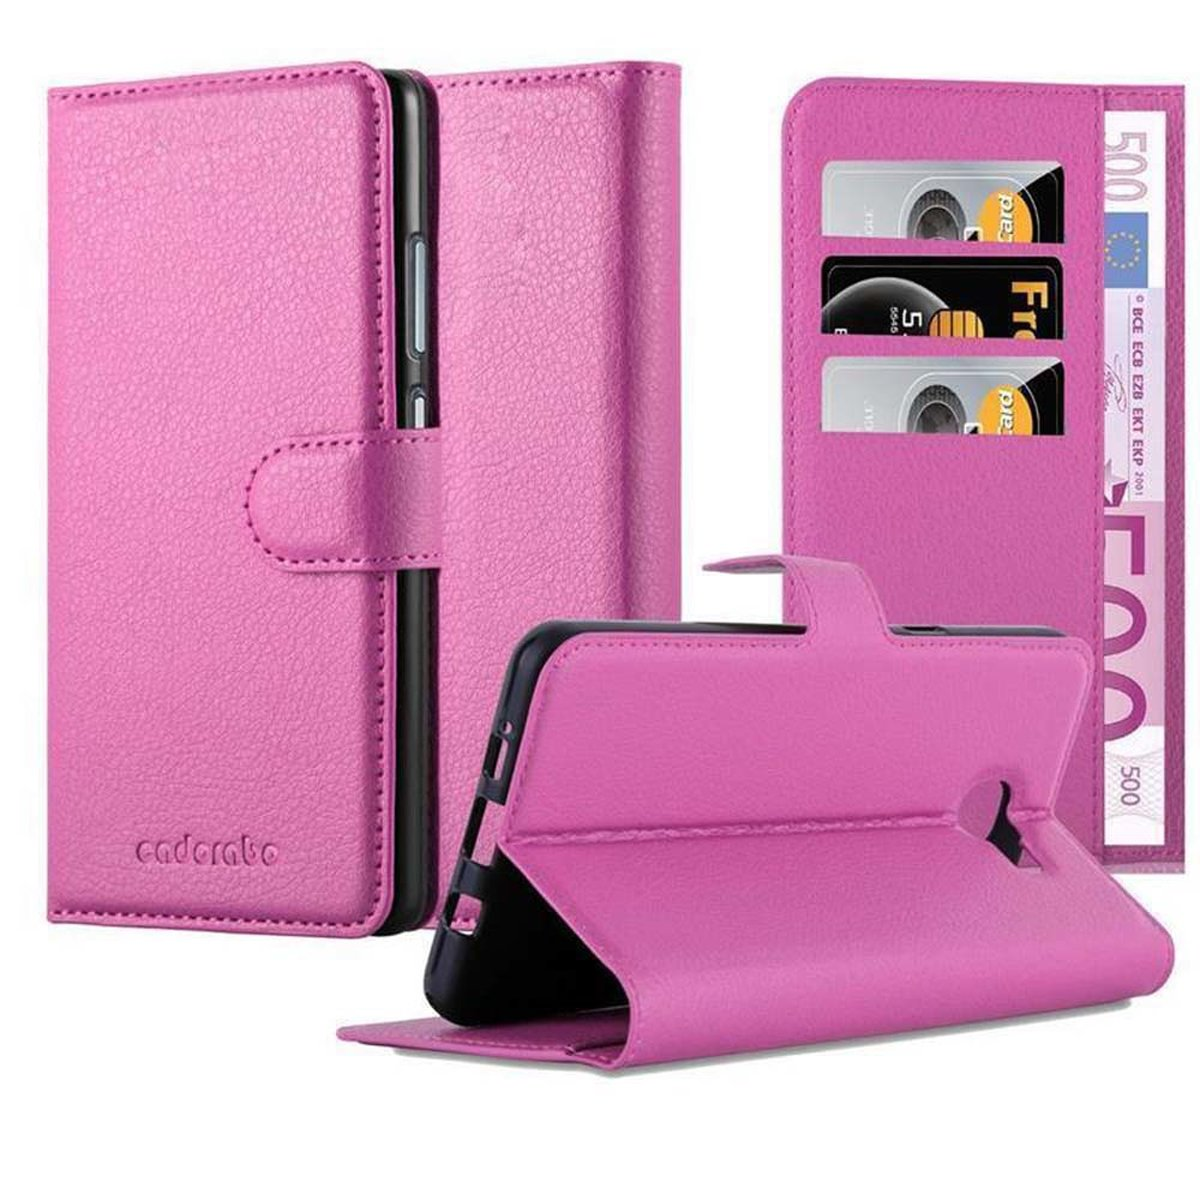 A9 Samsung, Galaxy PINK Book CADORABO 2016, Hülle Standfunktion, Bookcover, CHERRY